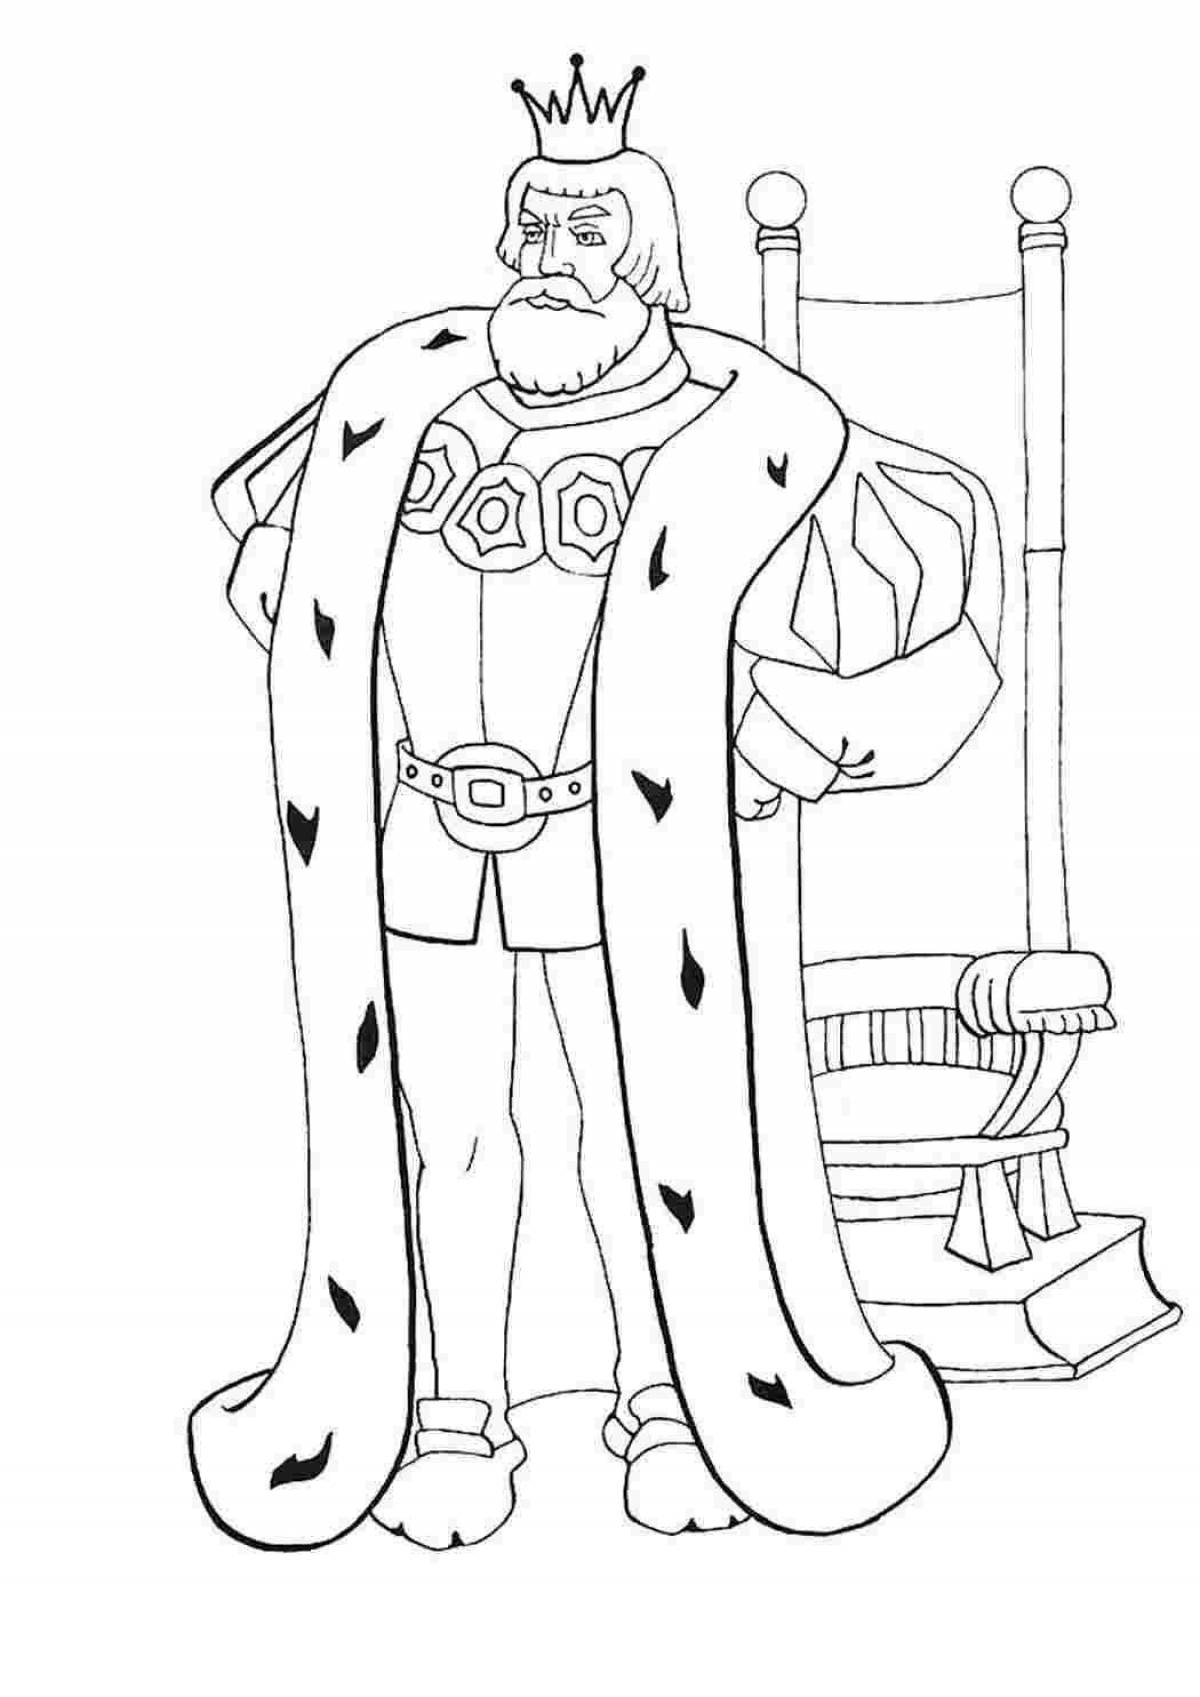 Coloring book dazzling king for kids